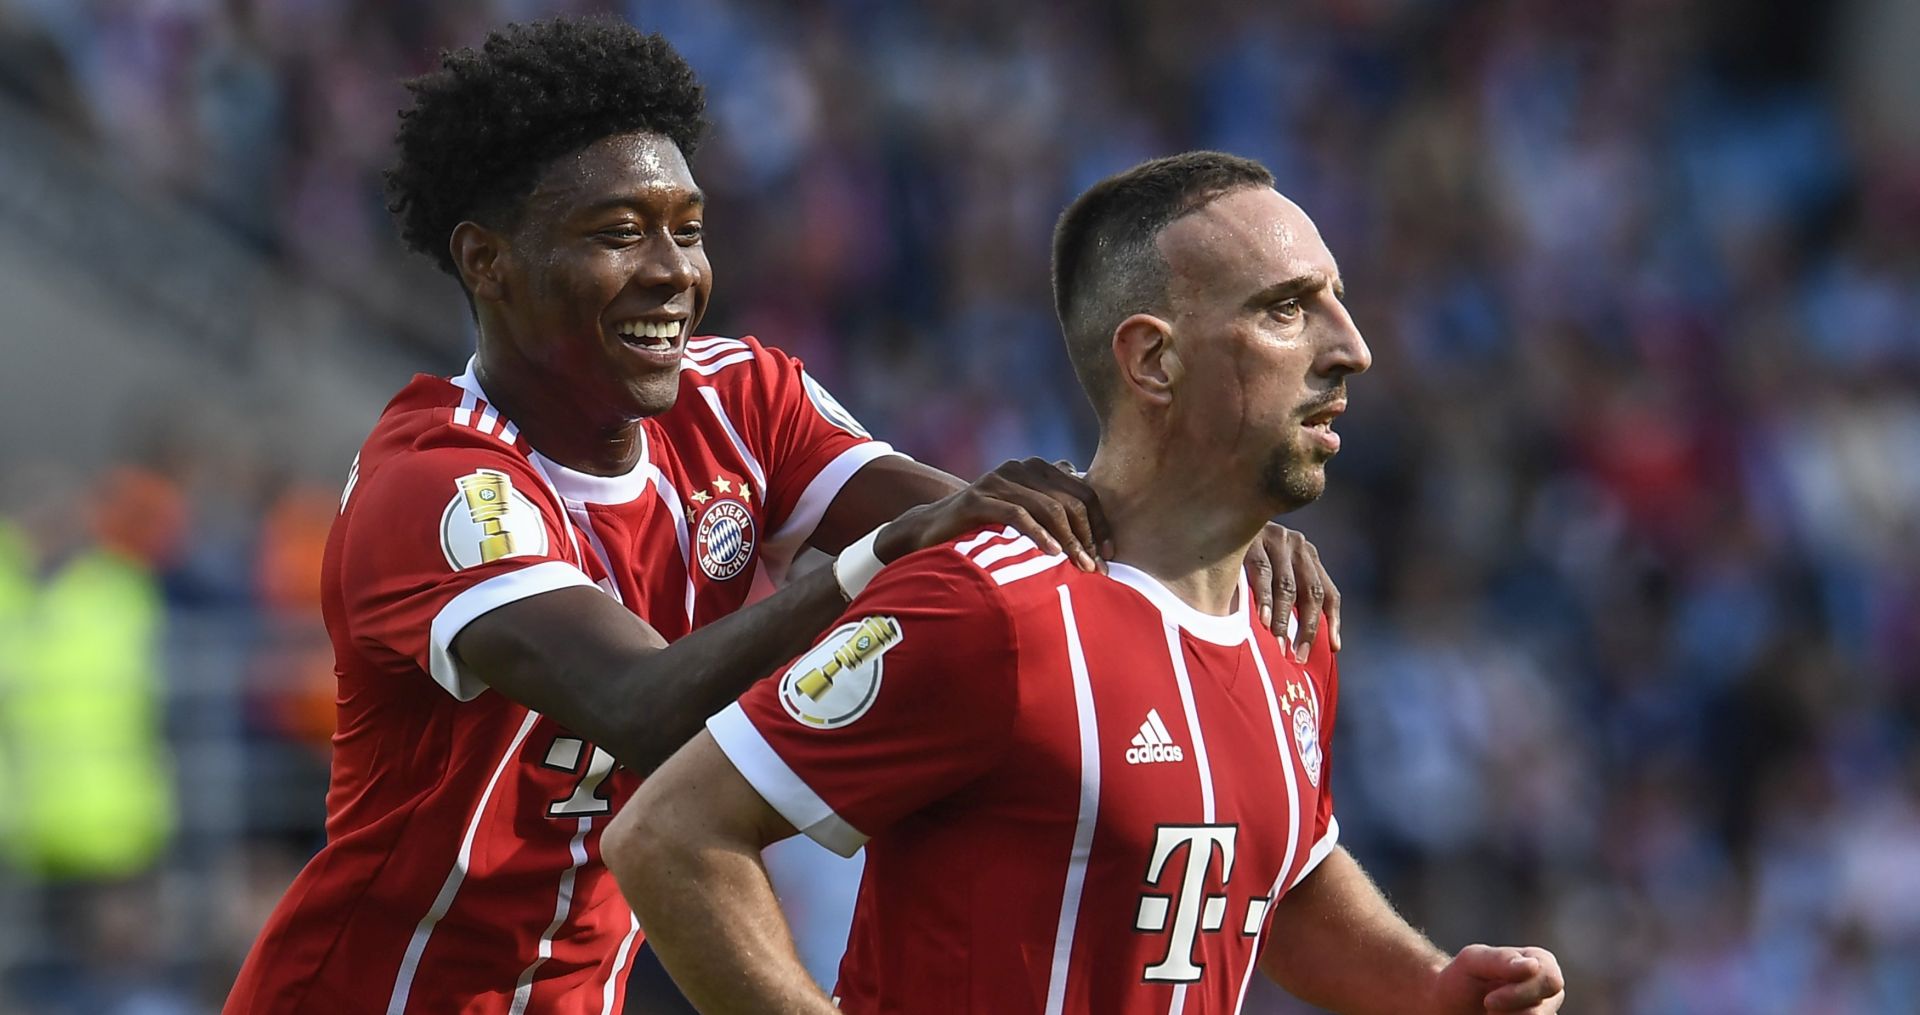 epa06140234 Bayern's Franck Ribery (R) celebrates with teammate David Alaba (L) after he scored against Chemnitzer FC during the German DFB Cup first round match between Chemnitzer FC and FC Bayern Munich in Chemnitz, Germany, 12 August 2017.  EPA/FILIP SINGER ATTENTION: BLOCKING PERIOD! The DFB permits the further utilisation and publication of the pictures for mobile services (especially MMS) and for DVB-H and DMB only after the end of the match.)